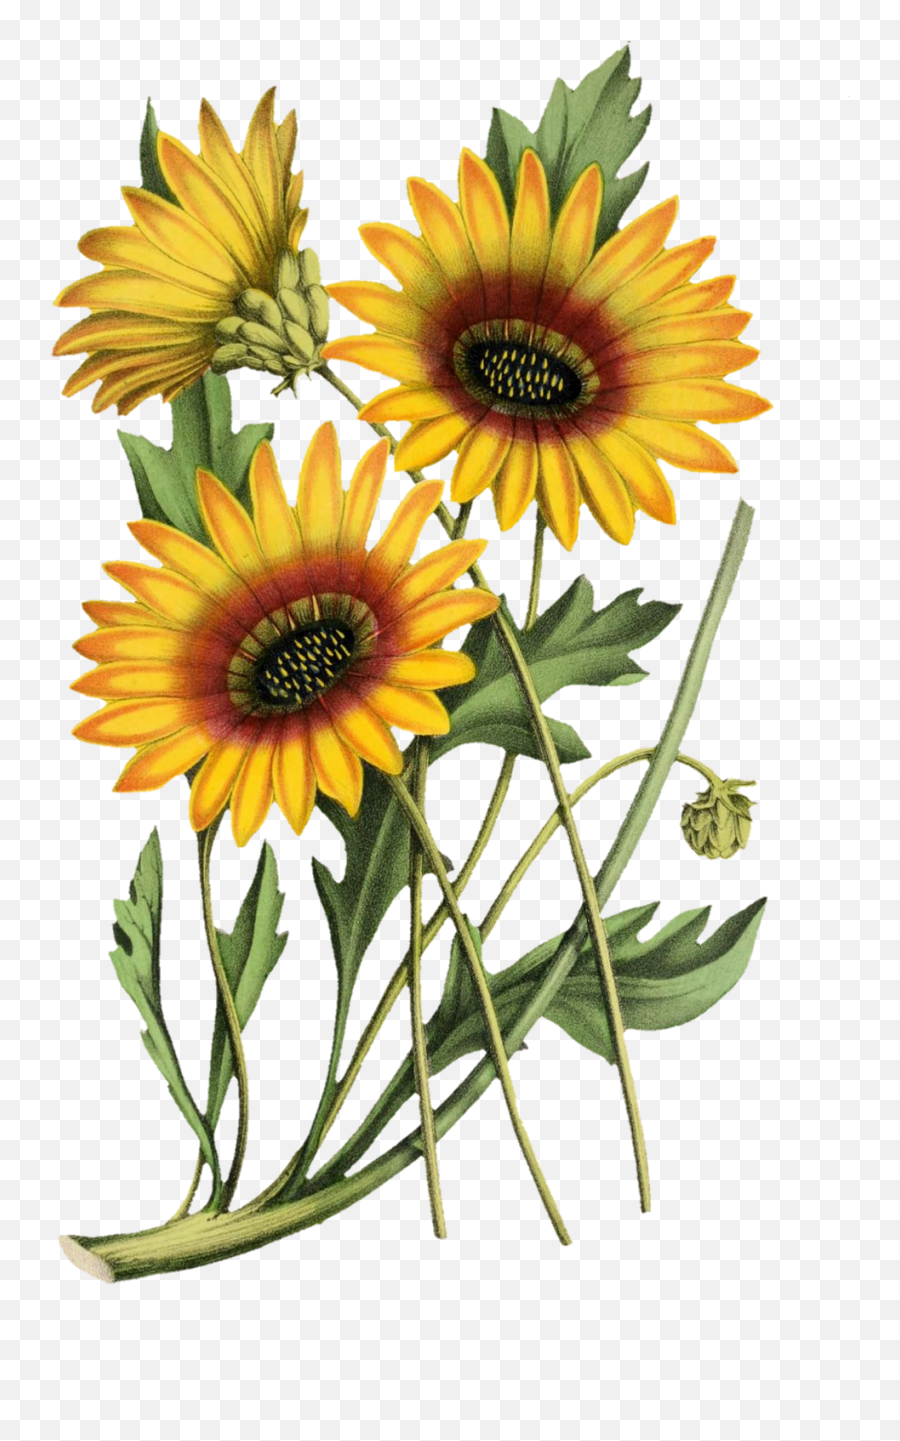 Sunflower Painted Art Clipart Free - Free Digital Scrapbooking Sunflower Emoji,Sunflowers Clipart